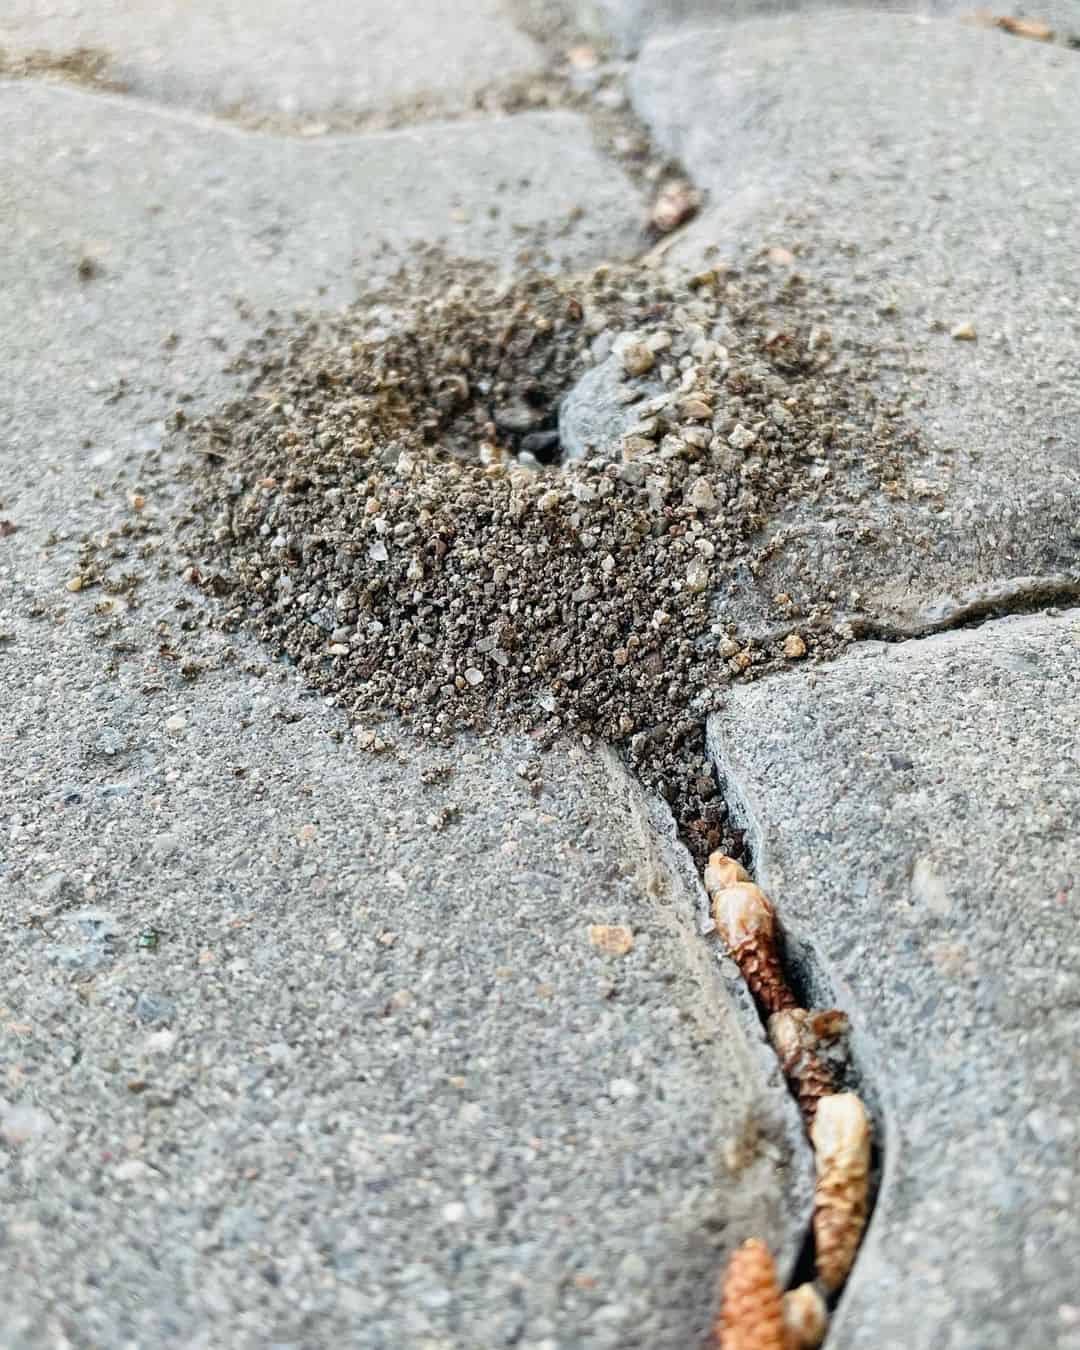 How Do I Get Rid of Ant Hills in My Yard?